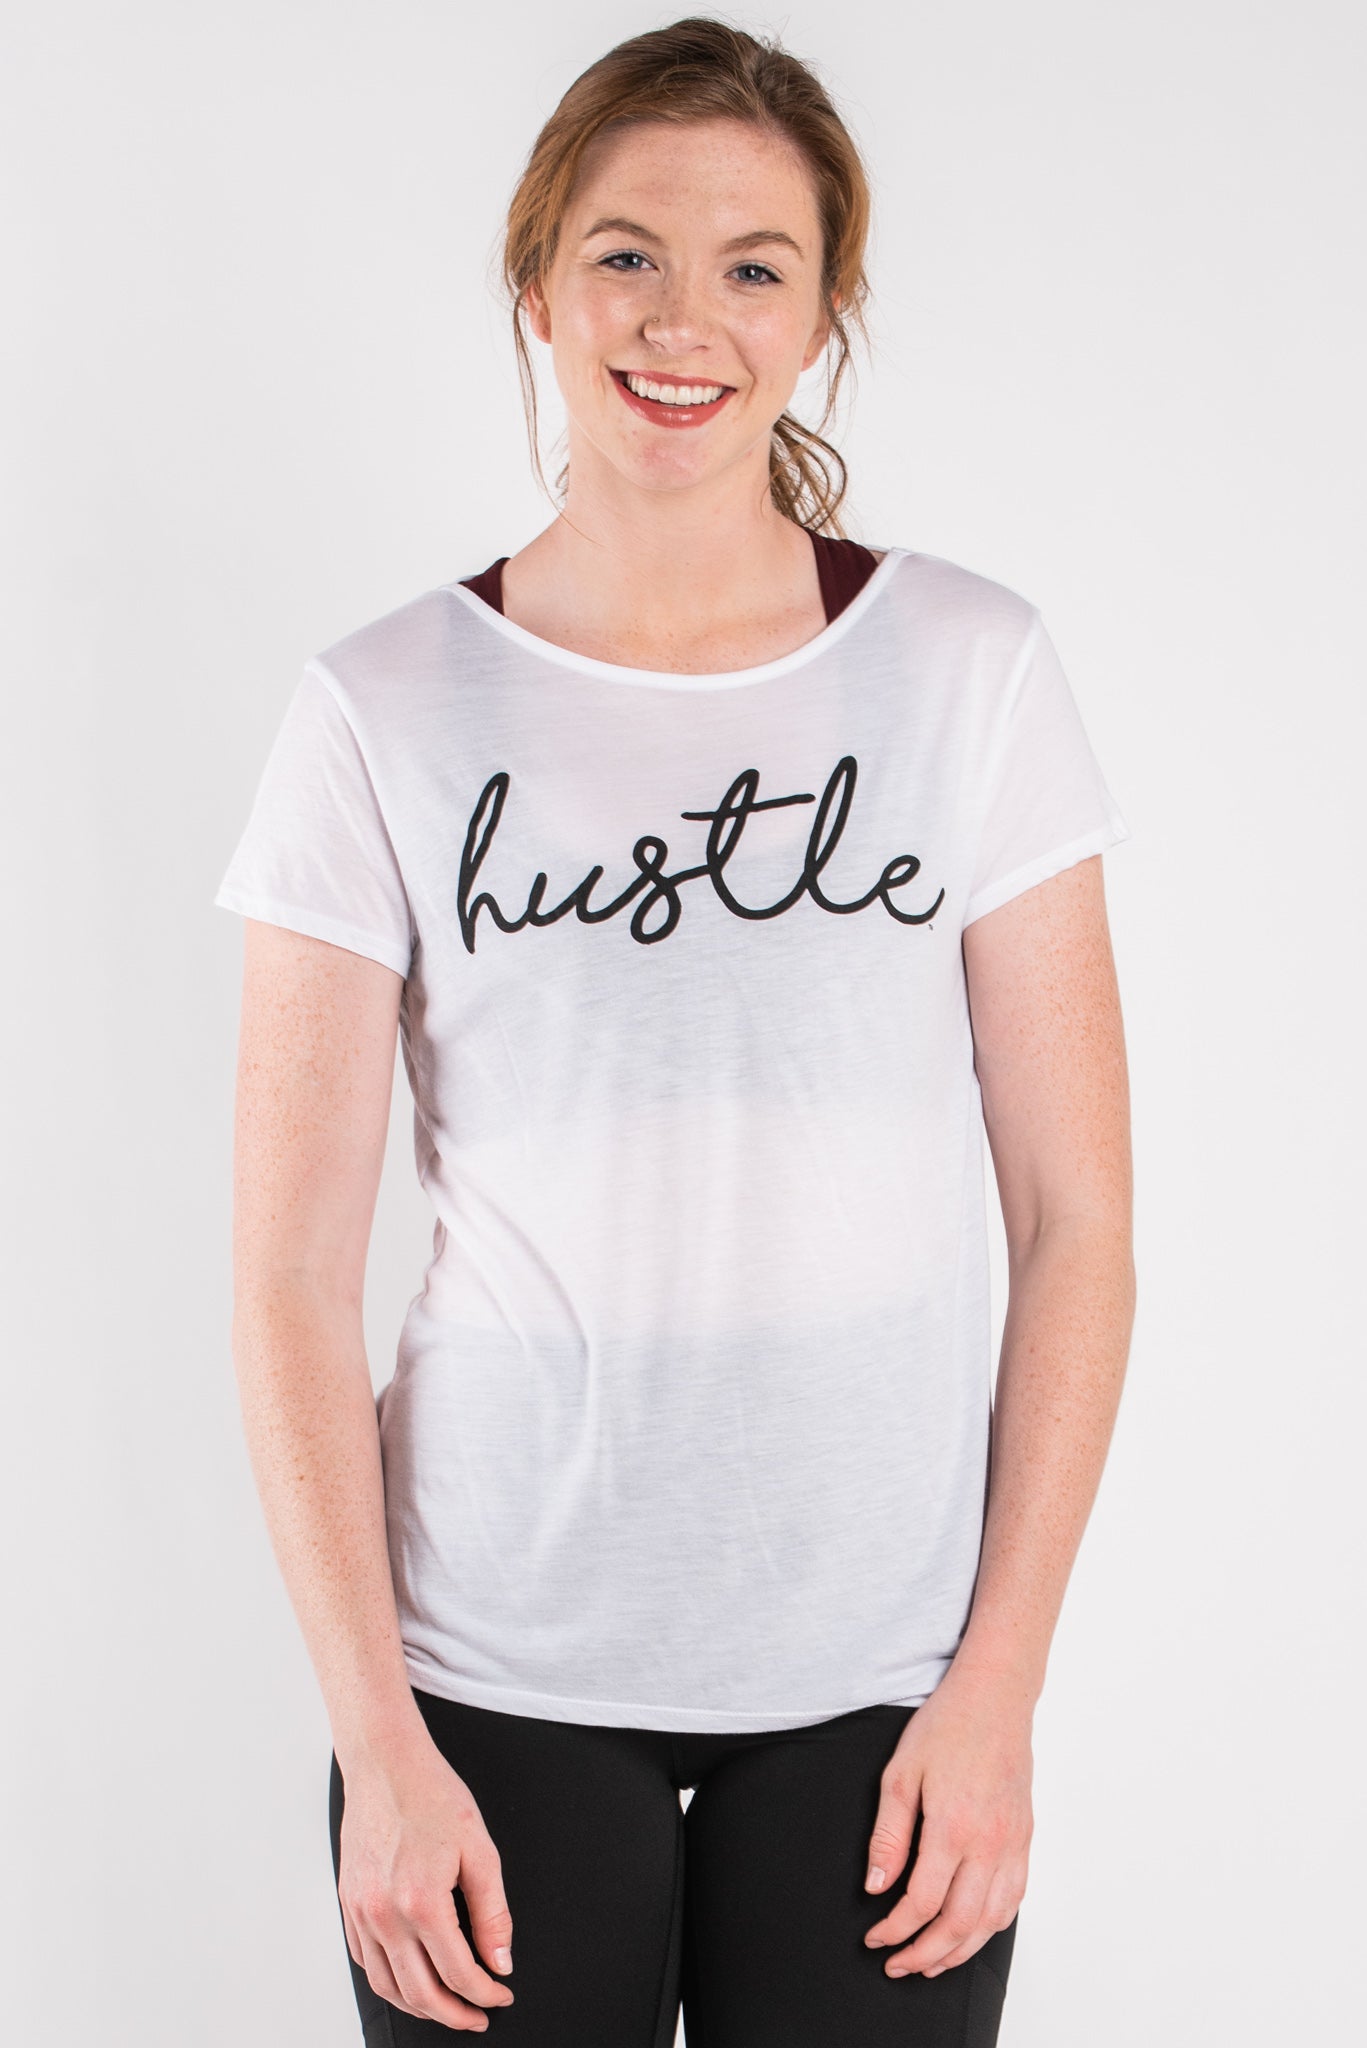 Hustle script criss cross back tee white - Cute T-shirts - Funny T-Shirts at Lush Fashion Lounge Boutique in Oklahoma City